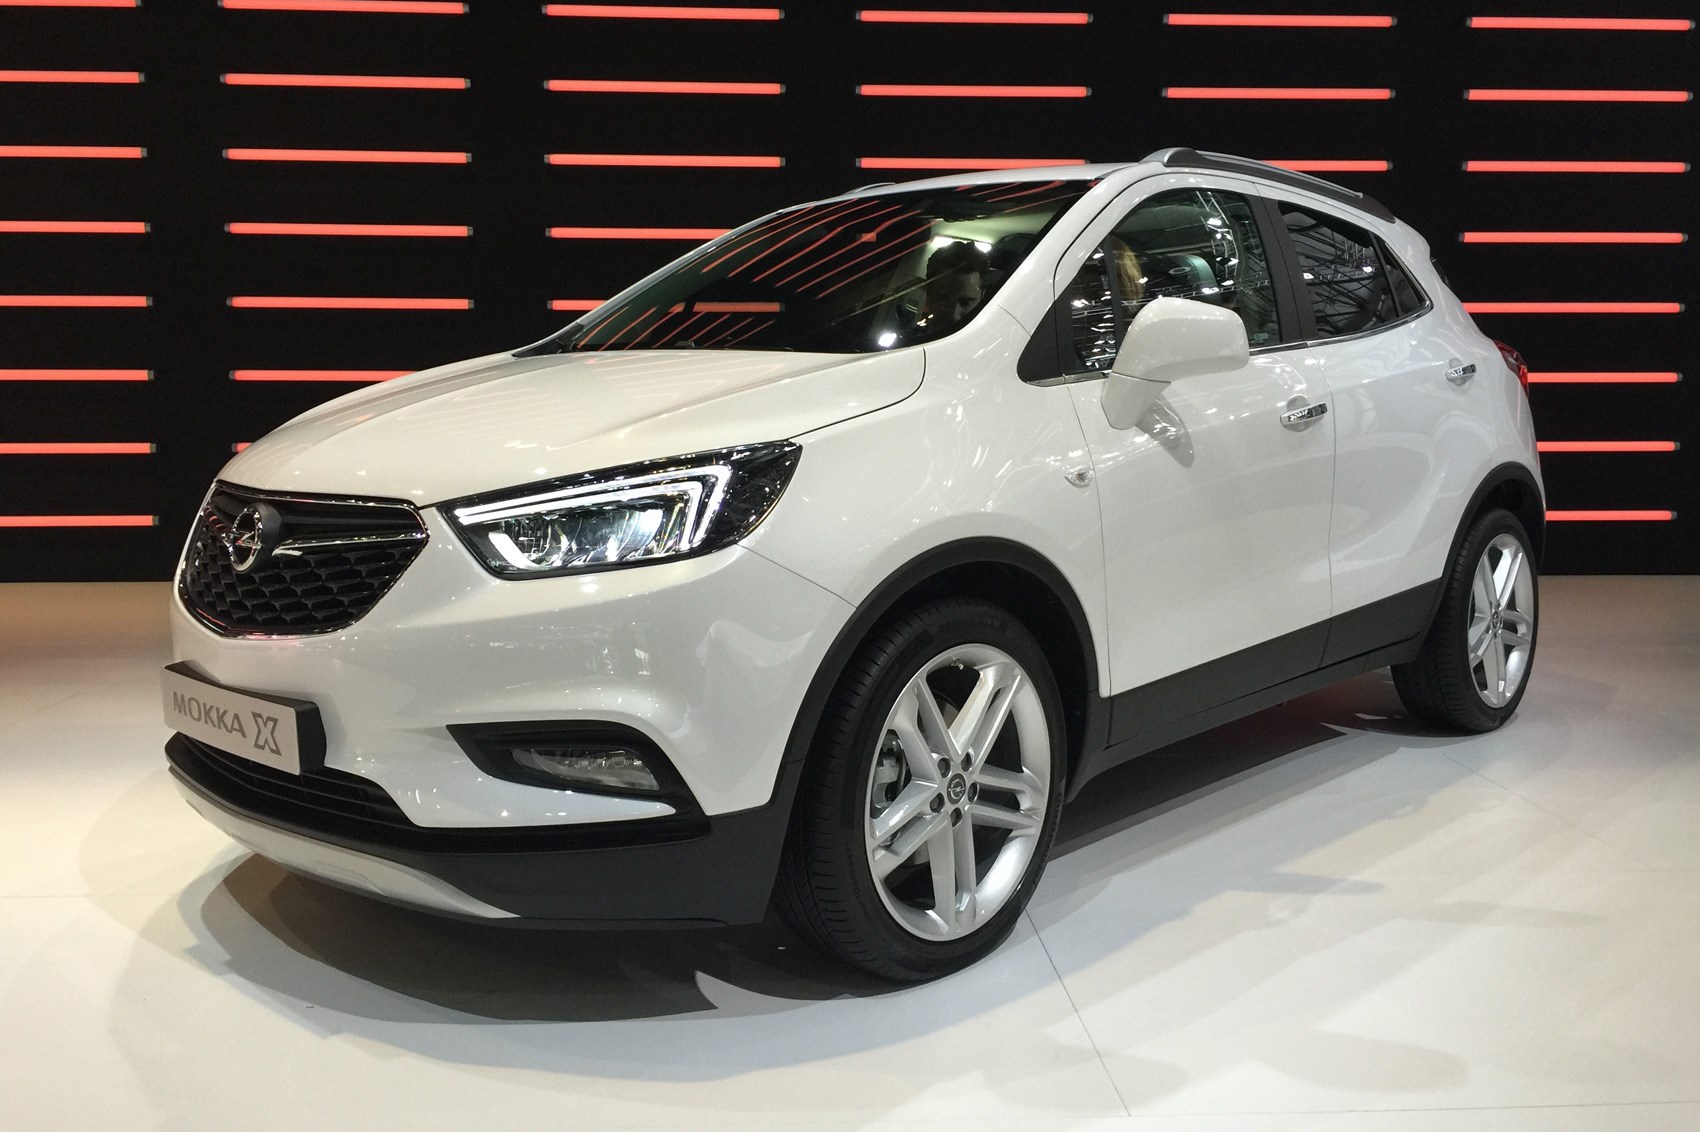 Vauxhall Mokka X Revealed A Facelift And A Name Change For